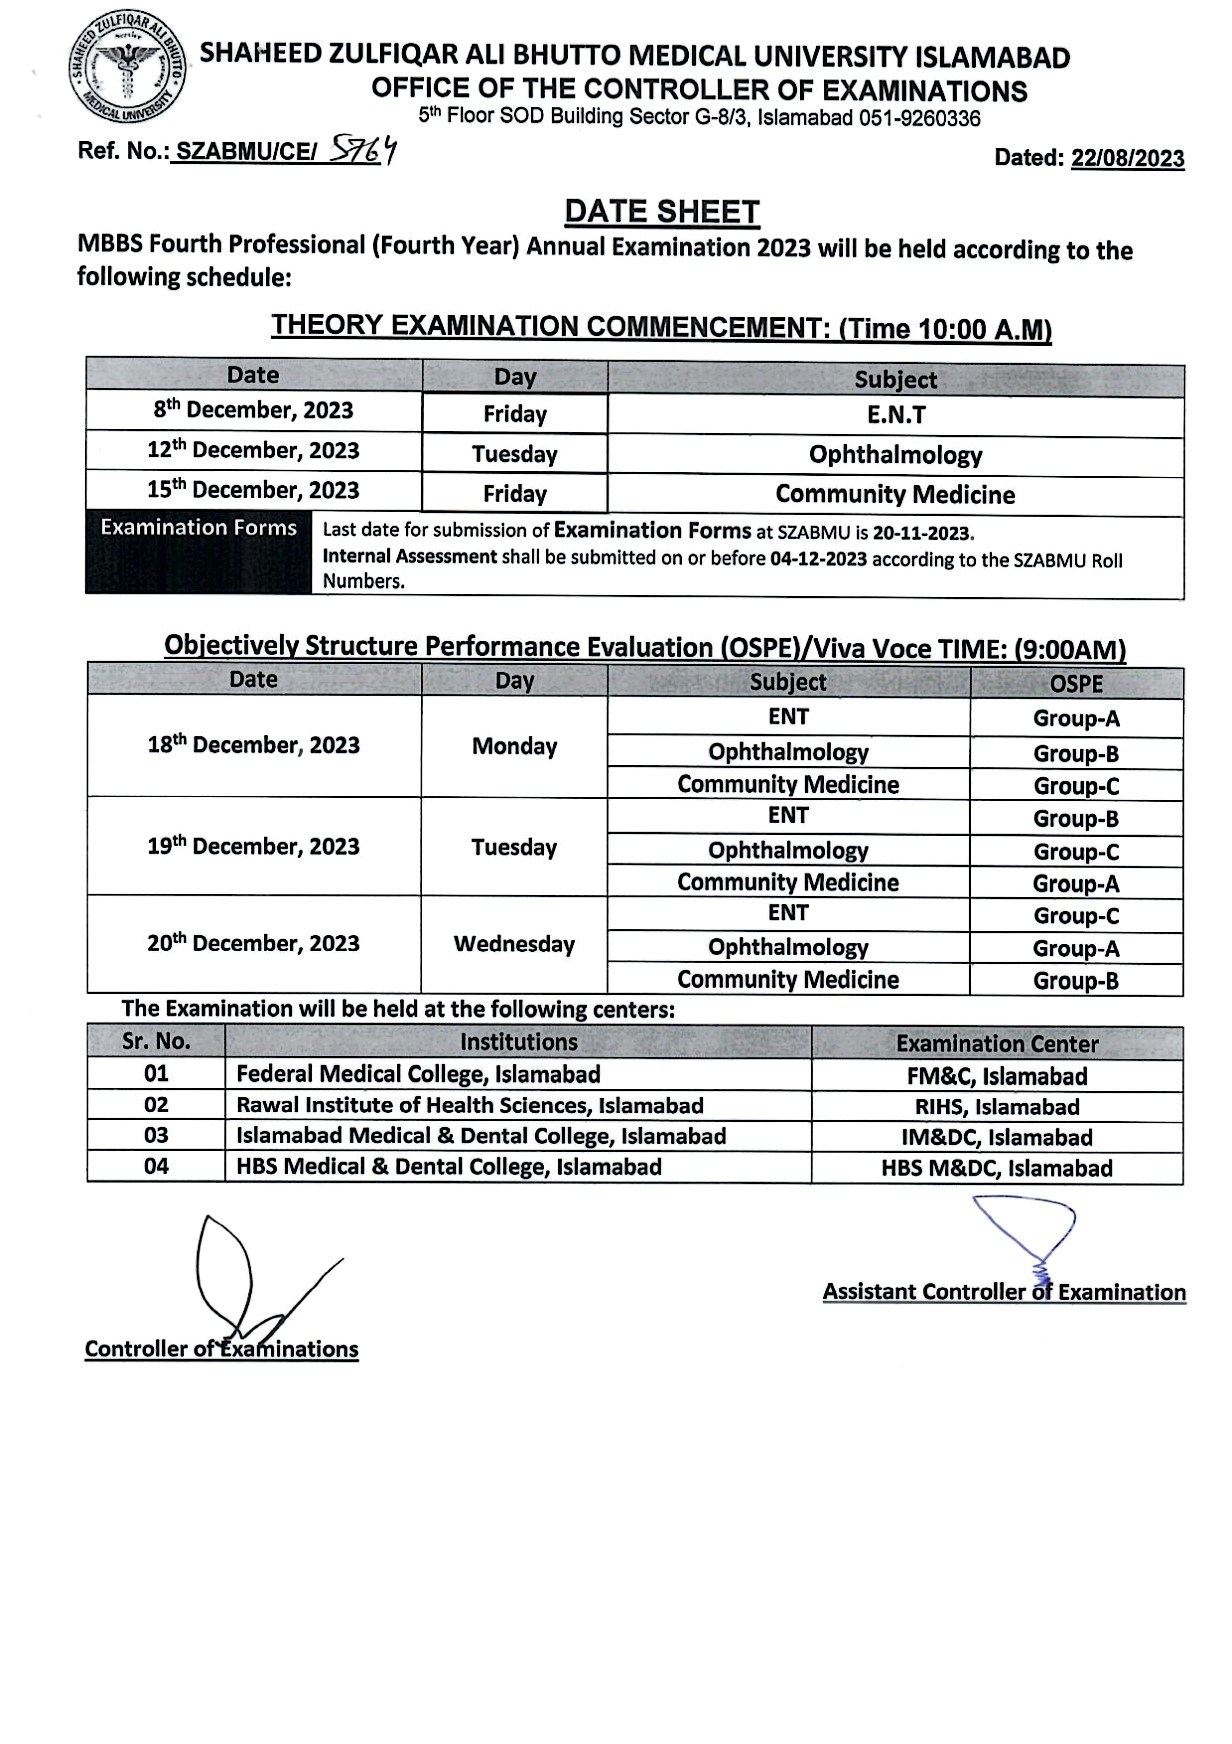 Date Sheet - MBBS All Professionals Annual Examinations 2023